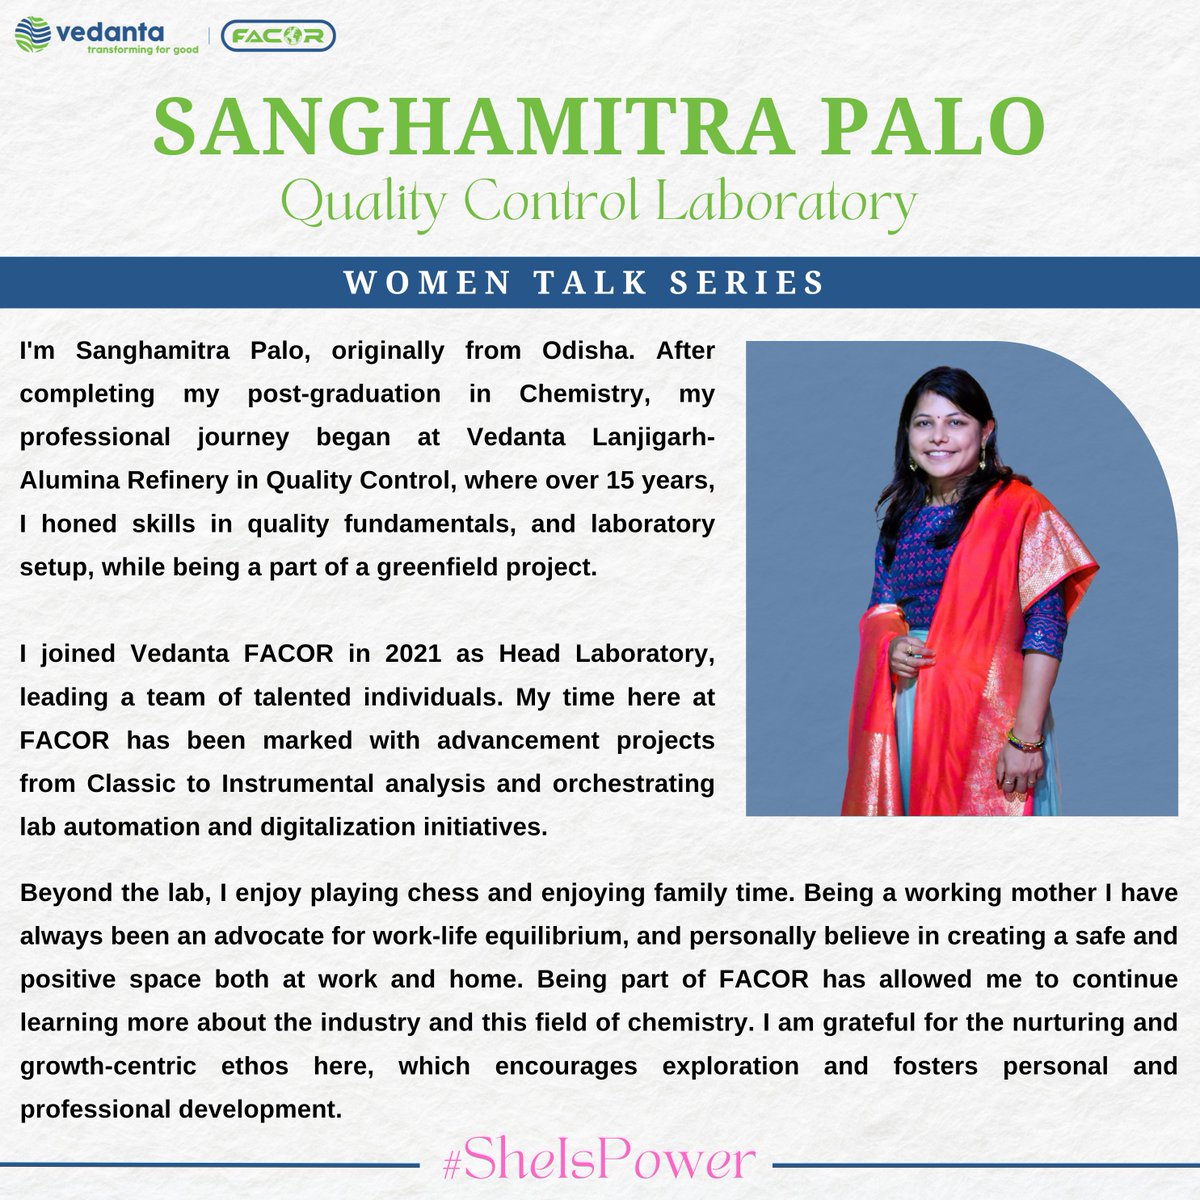 In sync with the ethos of #inclusivity, the Women Talk Series #SheIsPower highlights the exceptional minds at #FACOR. Meet Sanghamitra Palo from our Quality Control Laboratory at FACOR, one of the driving forces behind our #inclusiveworkplace culture. #transformingworkplace